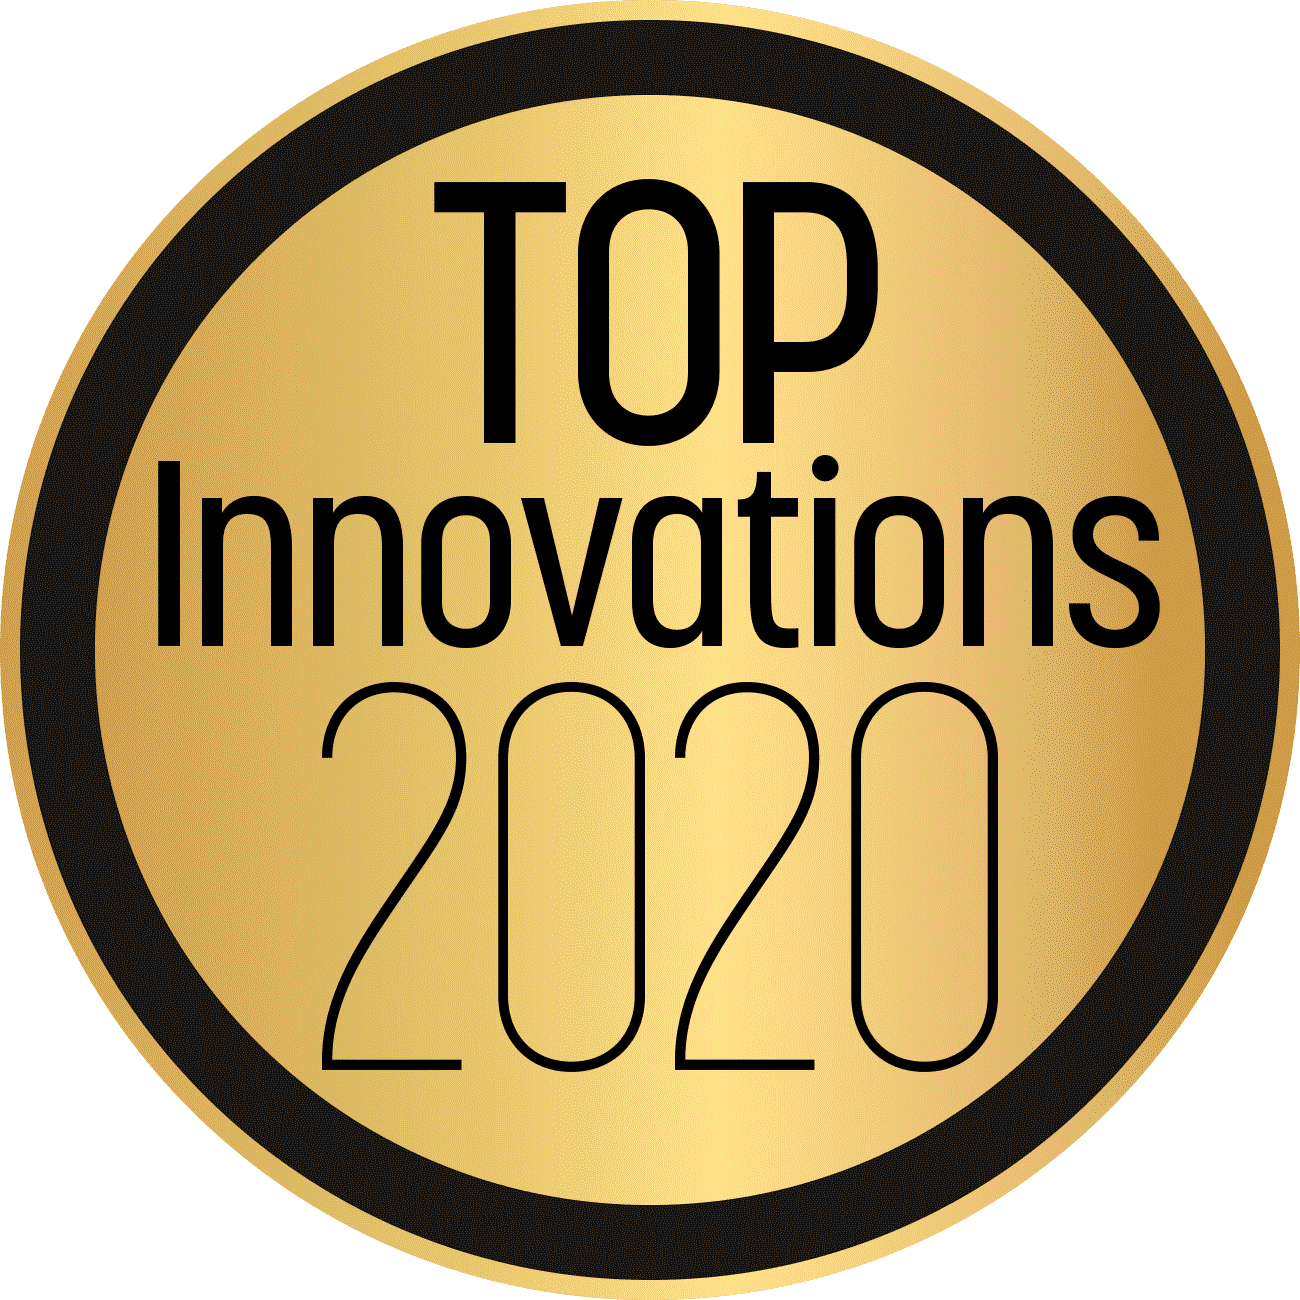 Top Innovations Seal